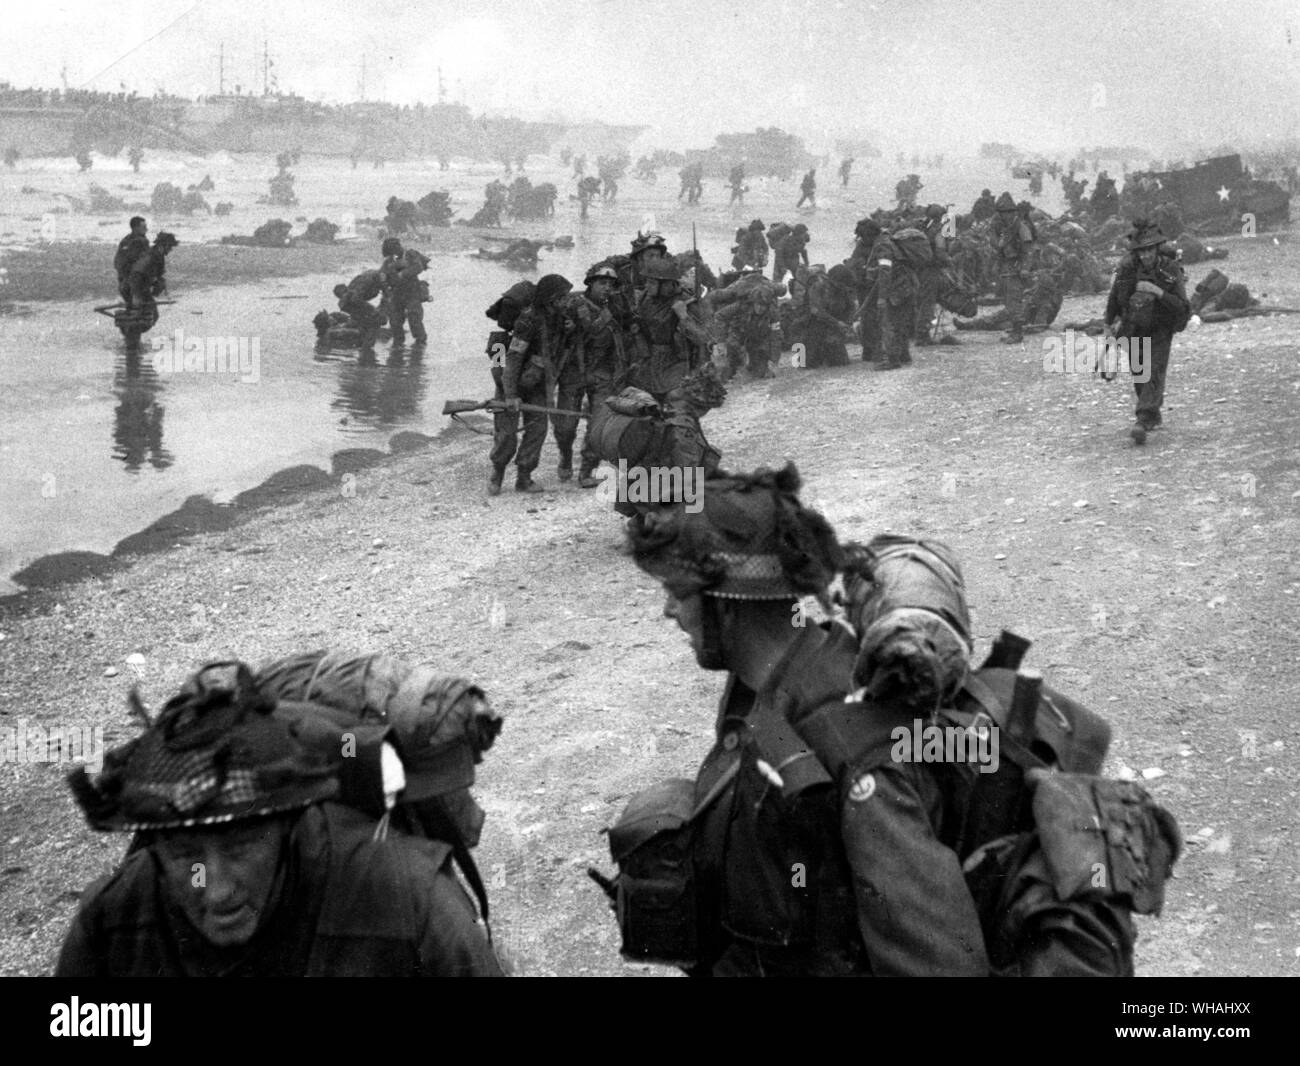 Troops assembling on beach from landing craft. Red Cross men attending to casualties. Broch Group? 13/18th Hussars. White Beach. 6th June 1944 D-Day. . WW2: Troops assembling on the beach from landing craft in the background. Red Cross men attending to casualties. Broch Group markings. 13/18th Hussars. White Beach, D day. 6th June 1944. Stock Photo